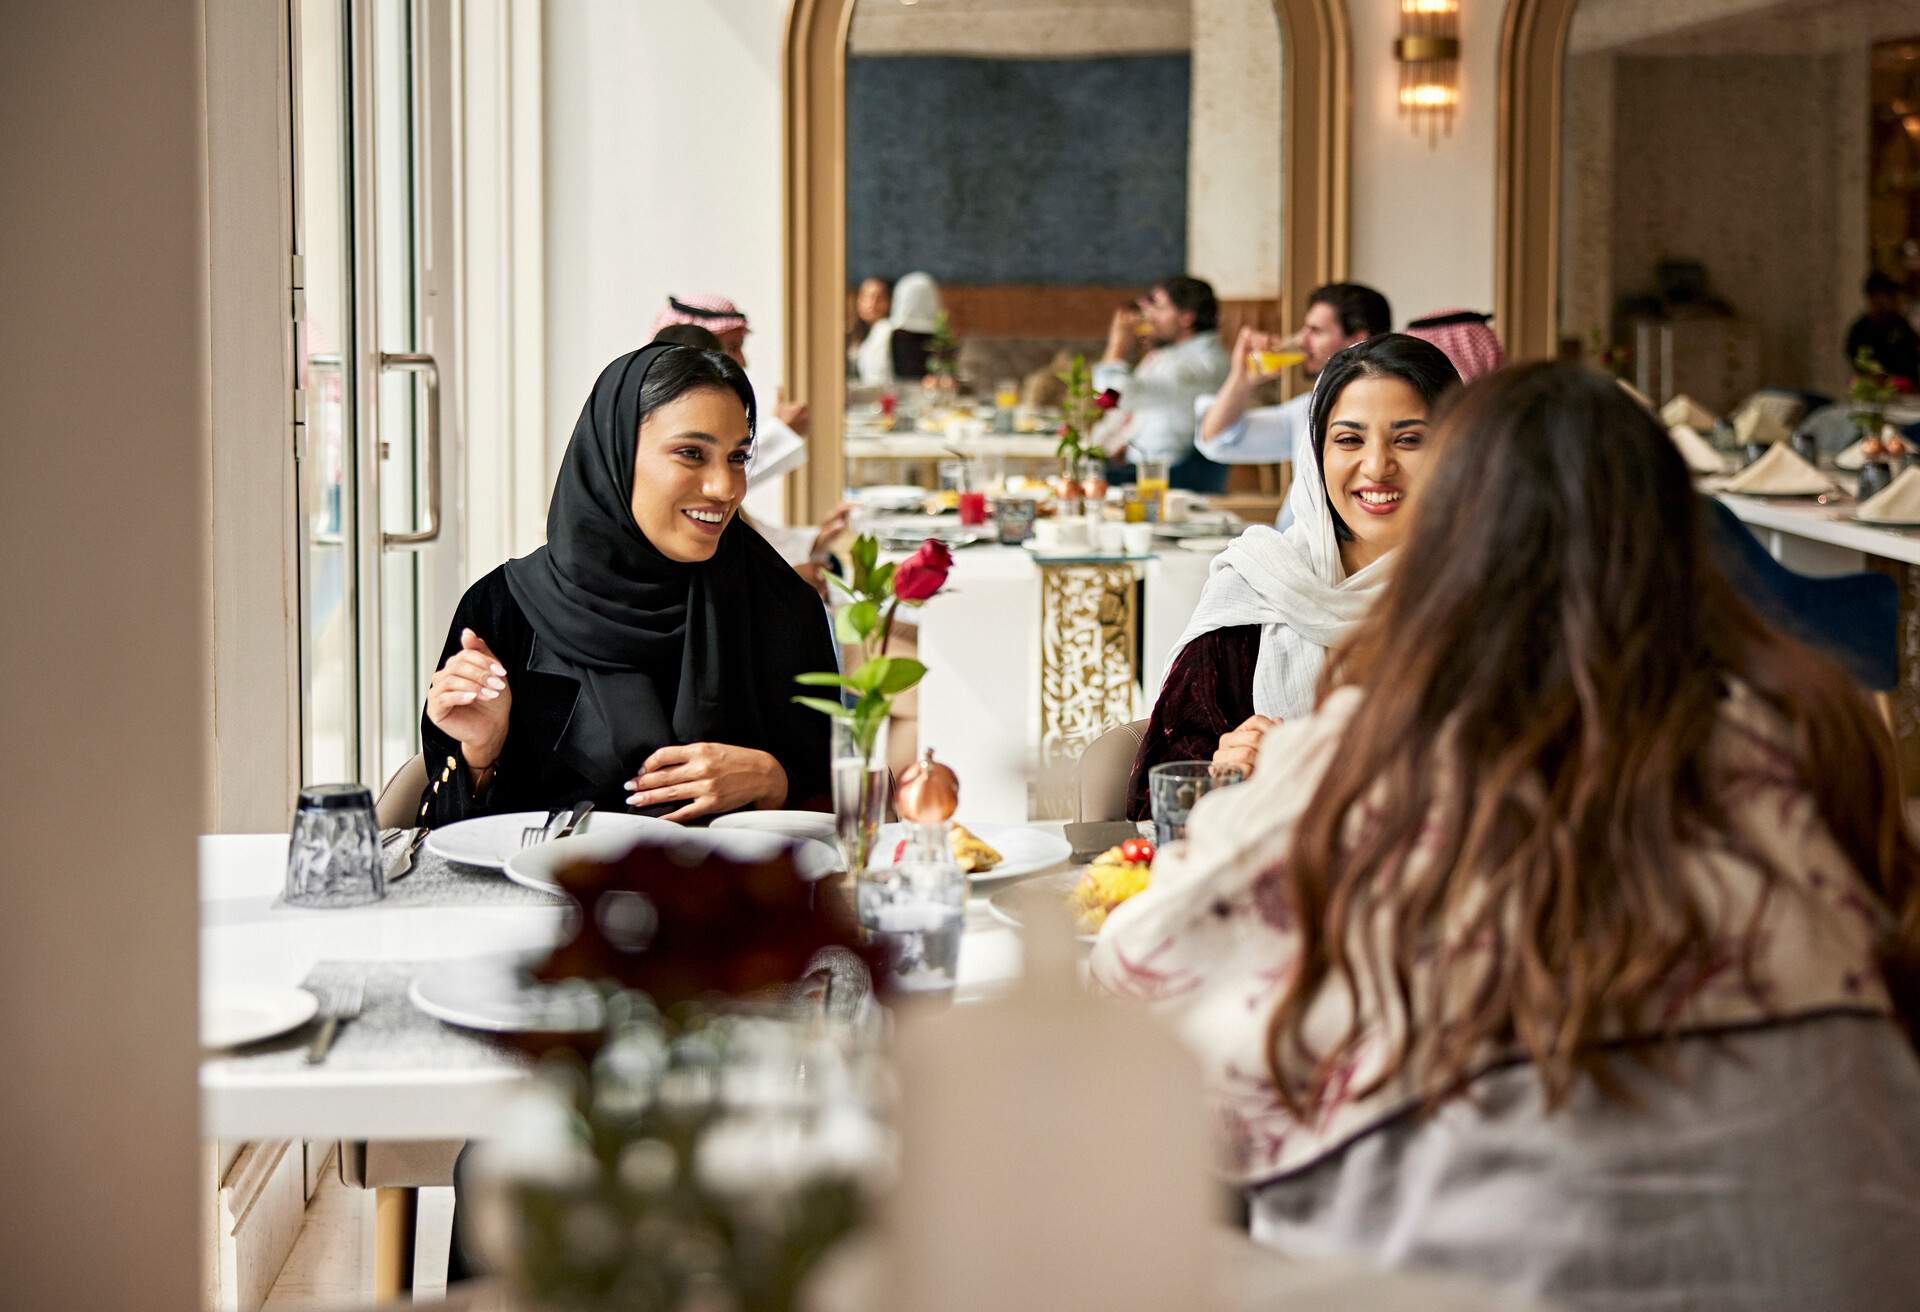 A group of women wearing scarves dining at a restaurant while cheerfully chatting with one another.